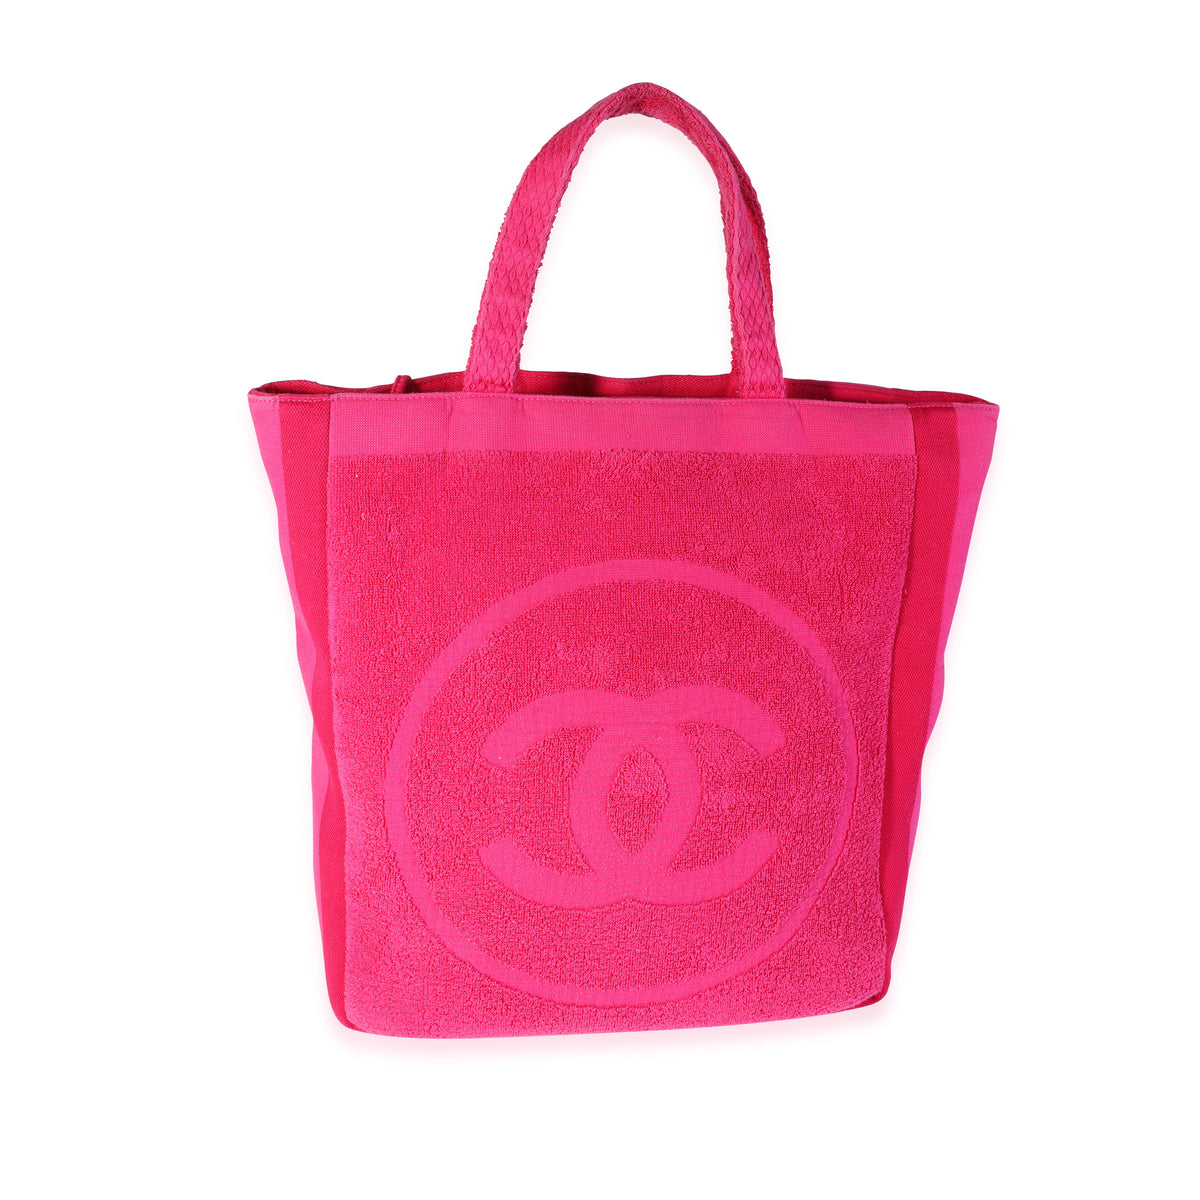 Chanel Light Pink Quilted Terry Cloth CC Large Tote Bag and Beach Towel